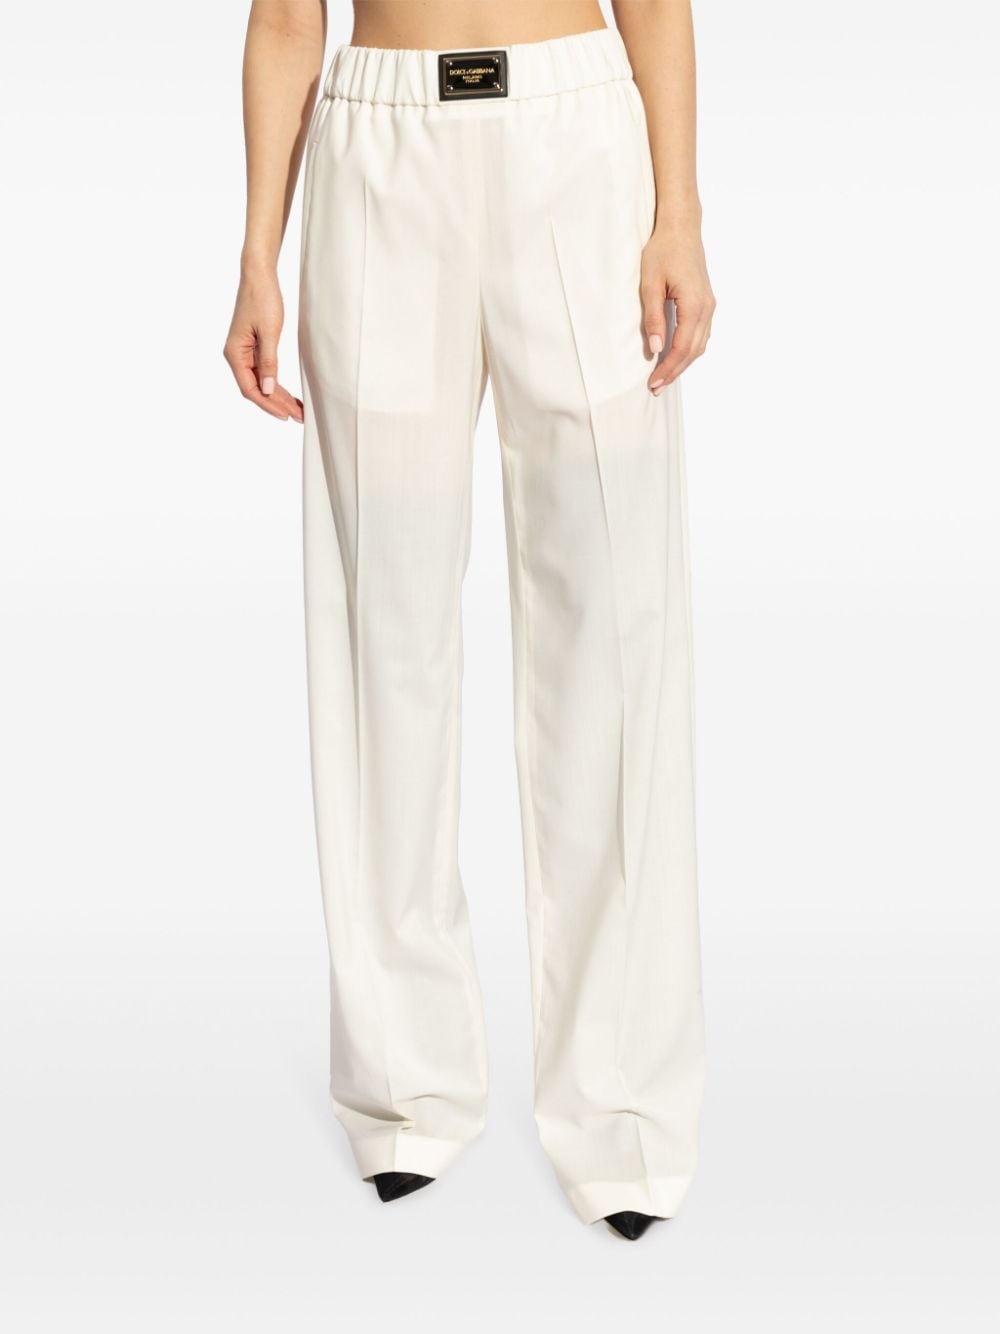 high-waisted wool trousers - 3